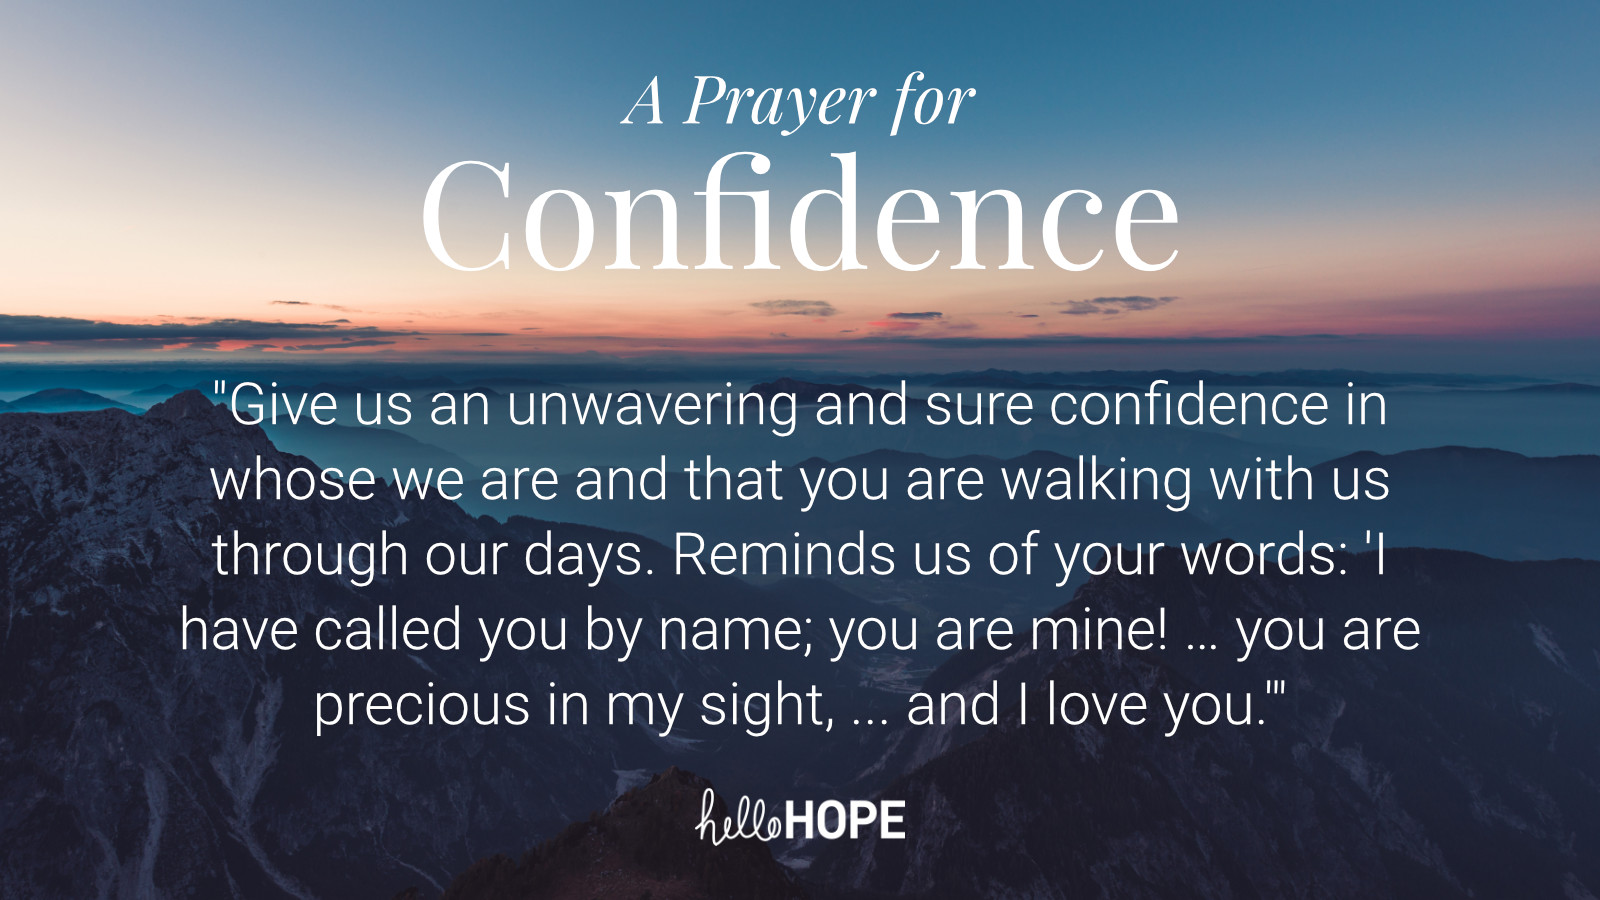 A Prayer for Confidence | helloHOPE